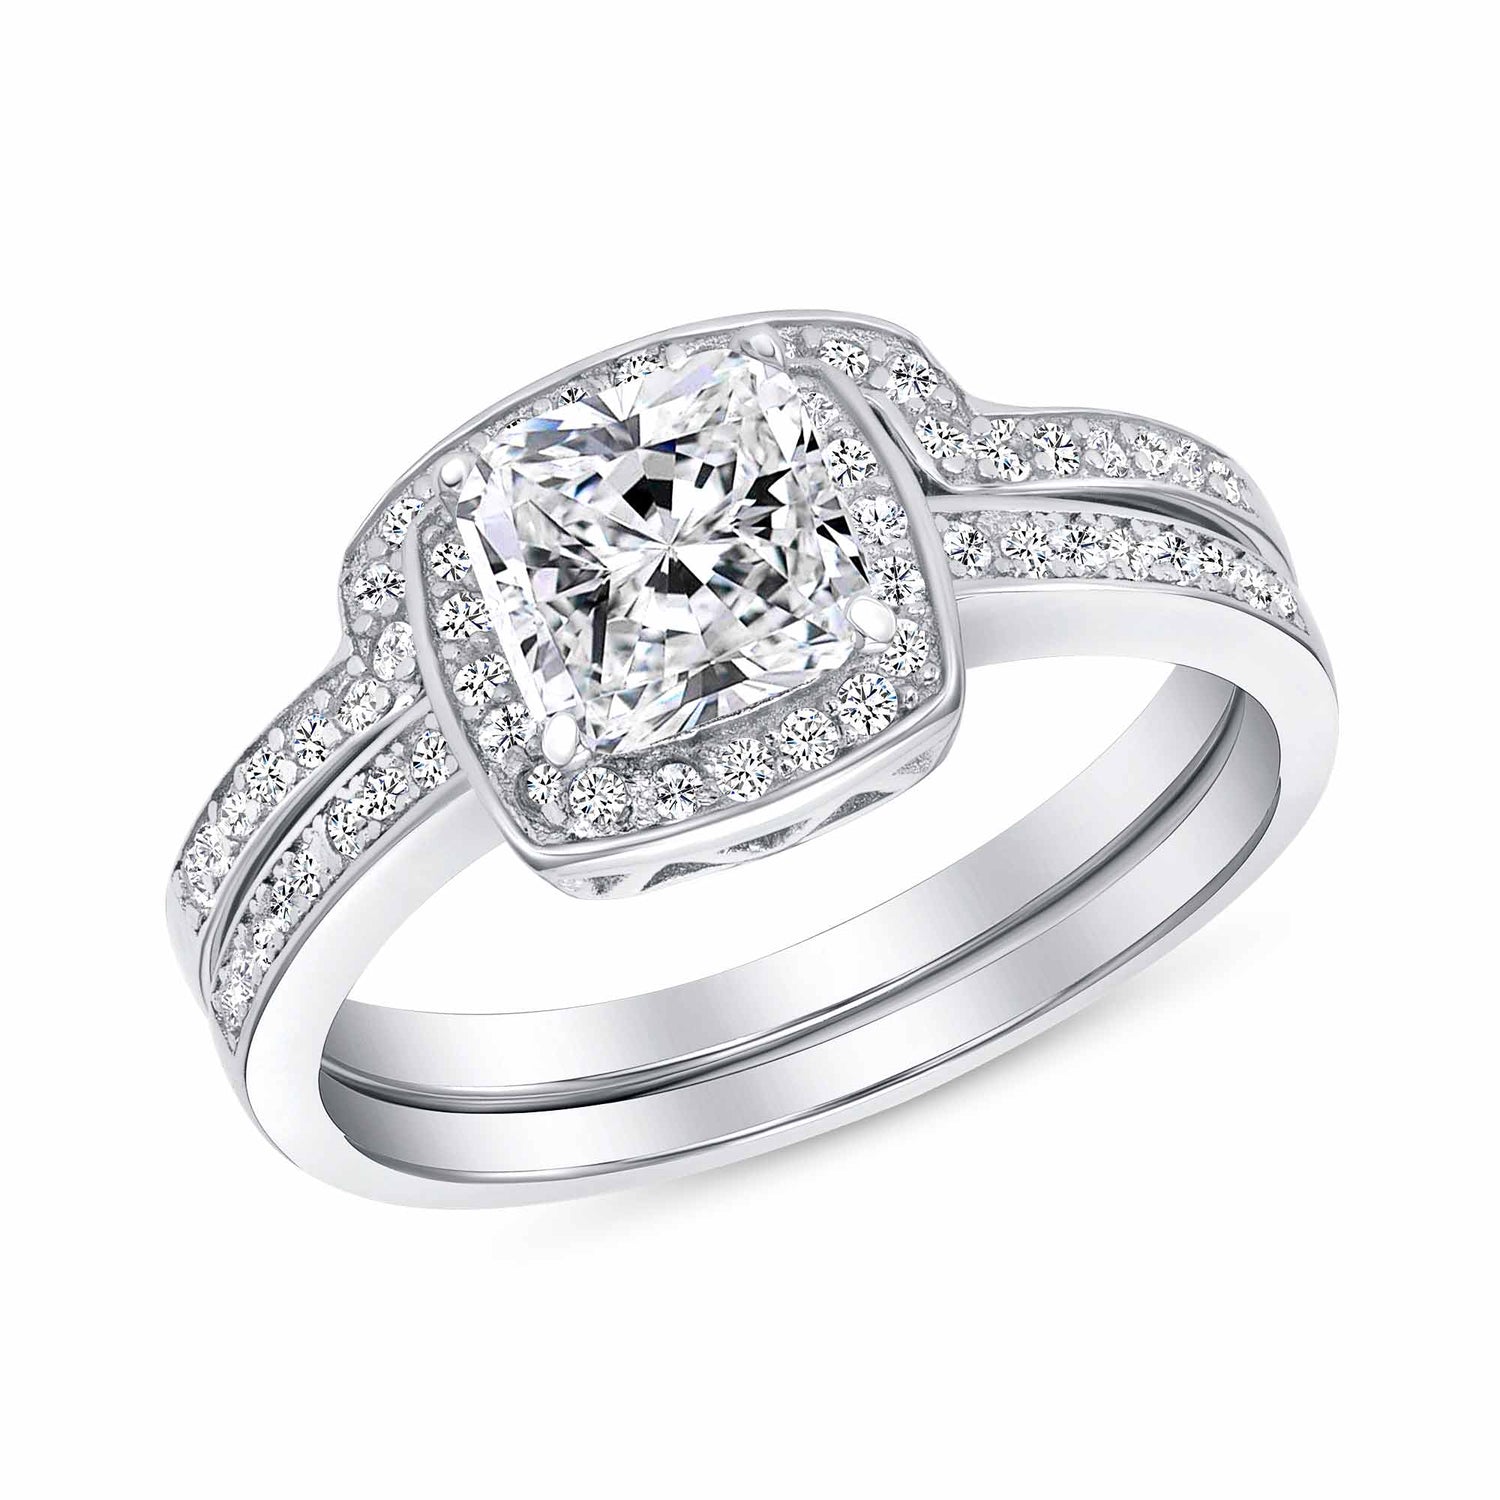 Sterling Silver 2 Piece Halo Style Ring And Cz Ban